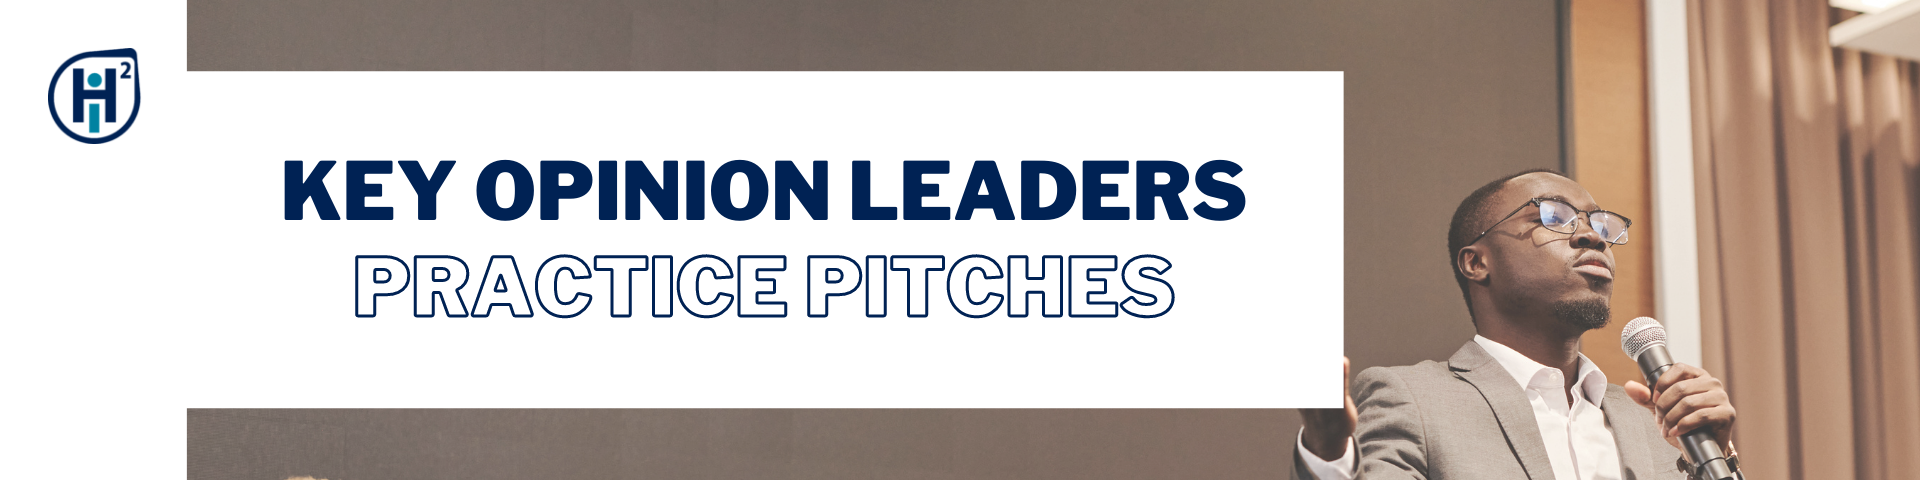 Key Opinion Leader Practice Pitches